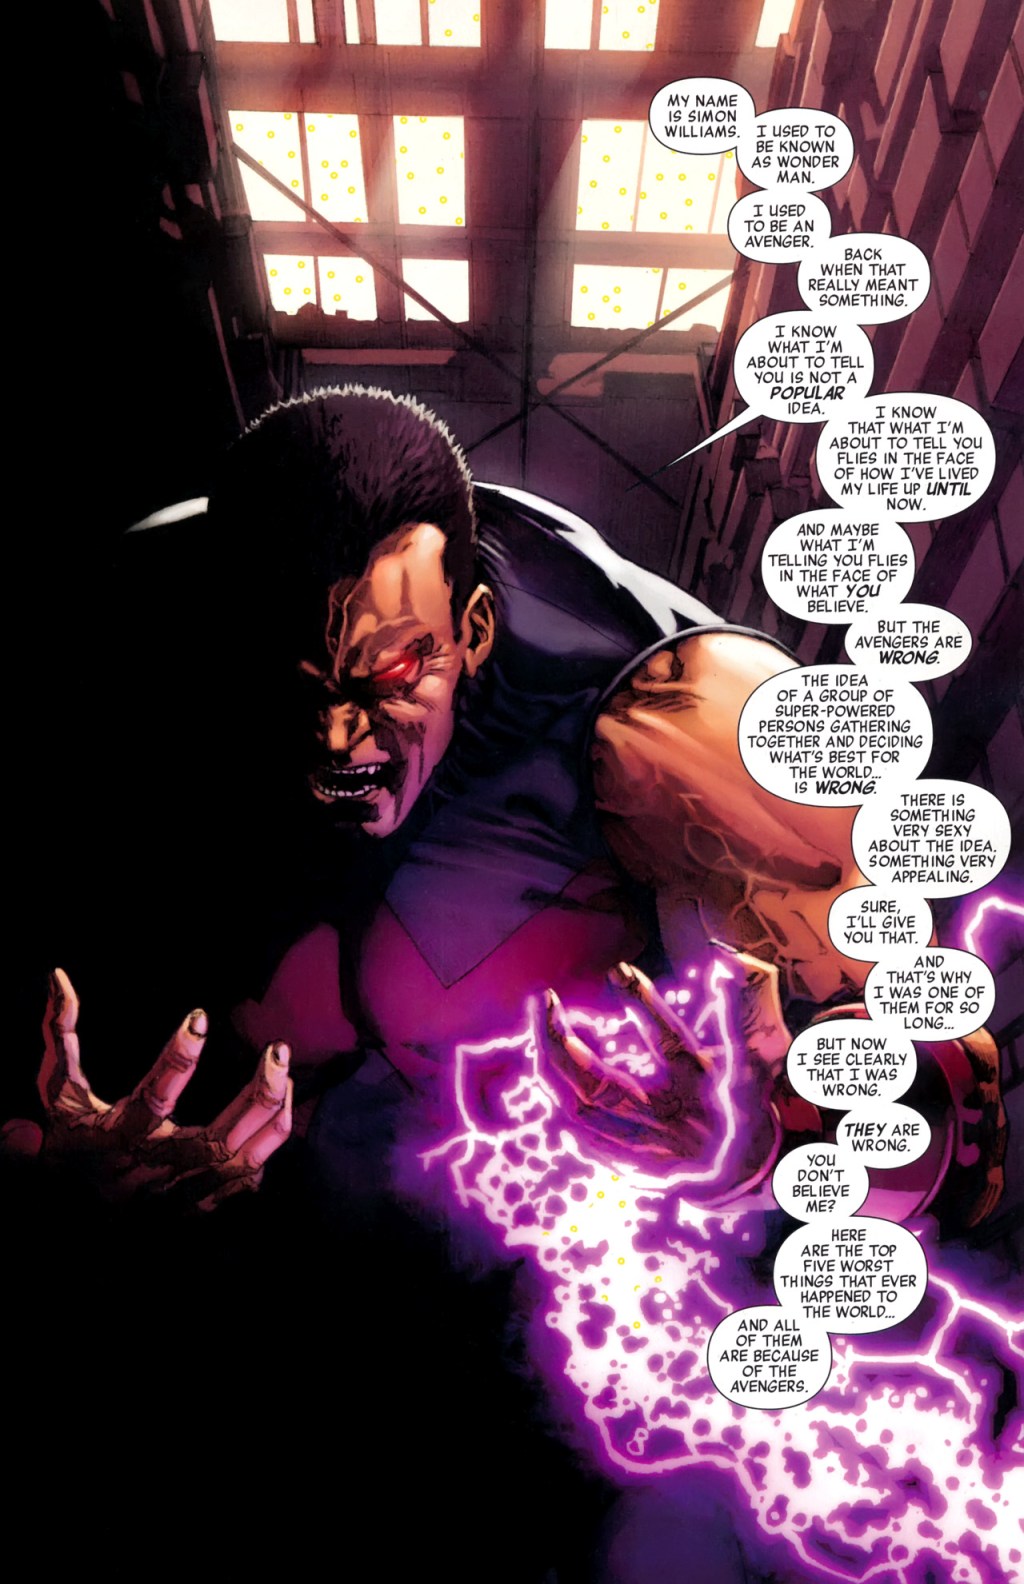 Wonder Man is done entertaining the concept of super heroes in New Avengers Annual Vol. 2 #12 "The Revengers!" (2011), Marvel Comics. Words by Brian Michael Bendis, art by Gabrielle Dell'Otto, Ive Svorcina, and Joe Caramagna.